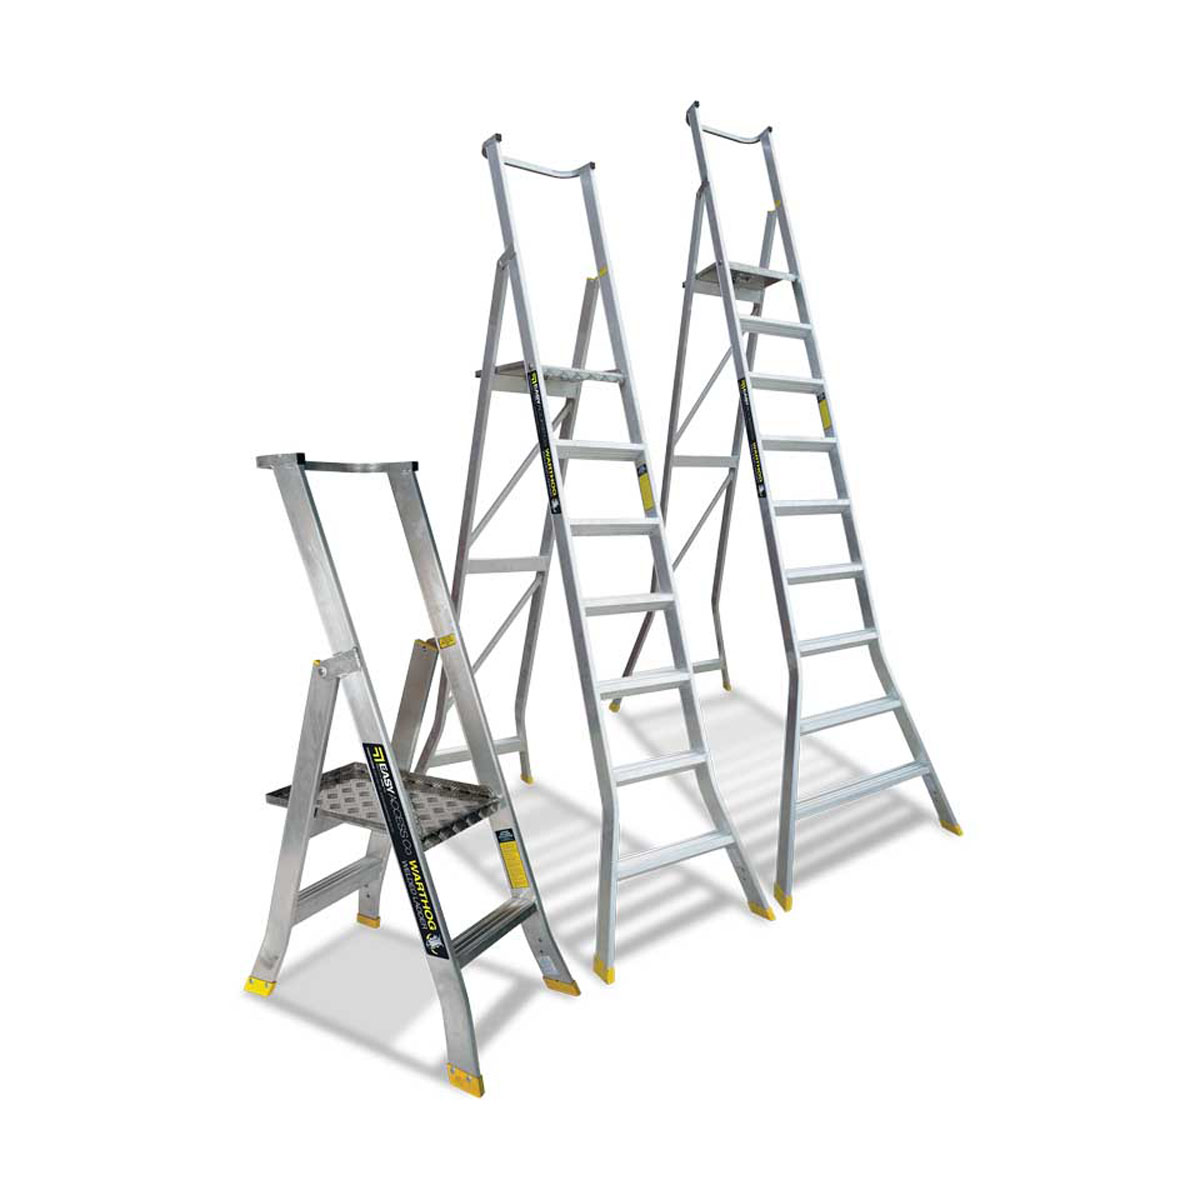 Buy Platform Ladders - Heavy-Duty in Platform Ladders from Warthog available at Astrolift NZ